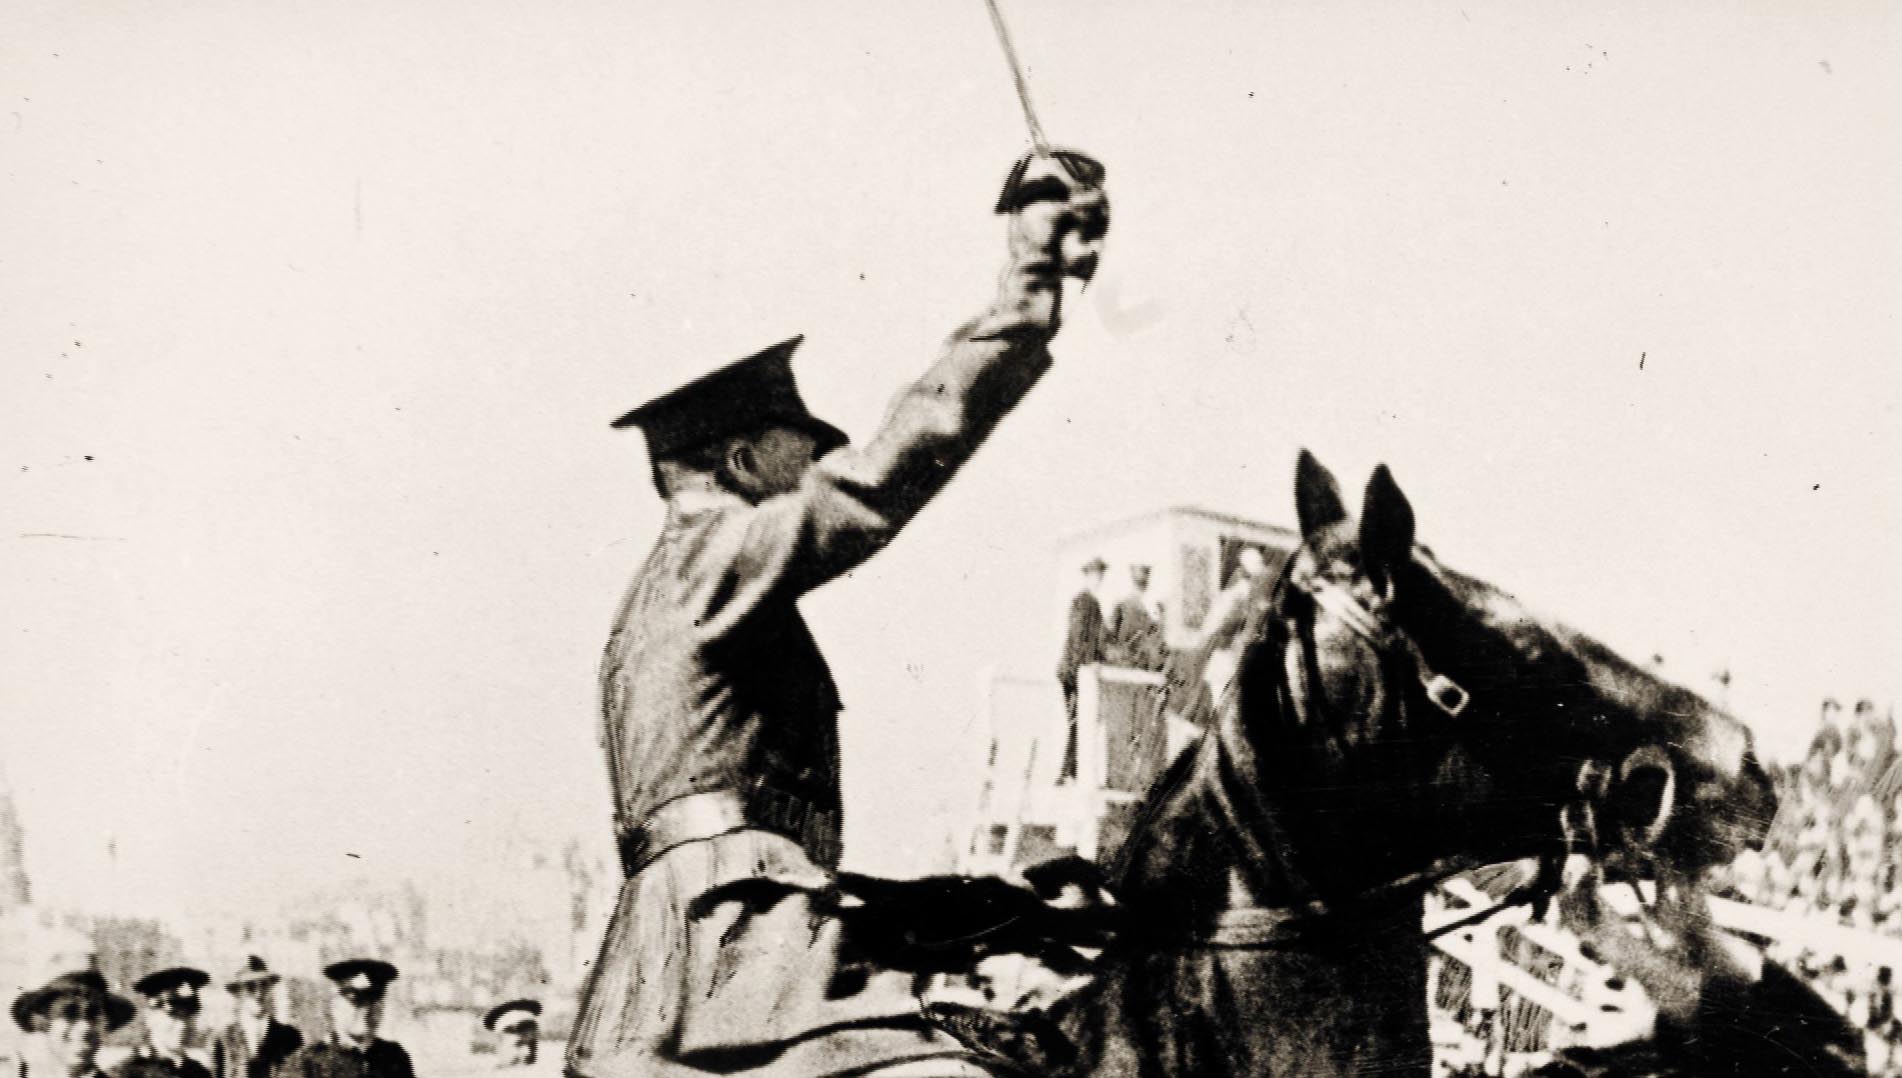 A still from a newsreel showing Major Francis De Groot on horseback with his sword aloft having just cut the ribbon of the Sydney Harbour Bridge.